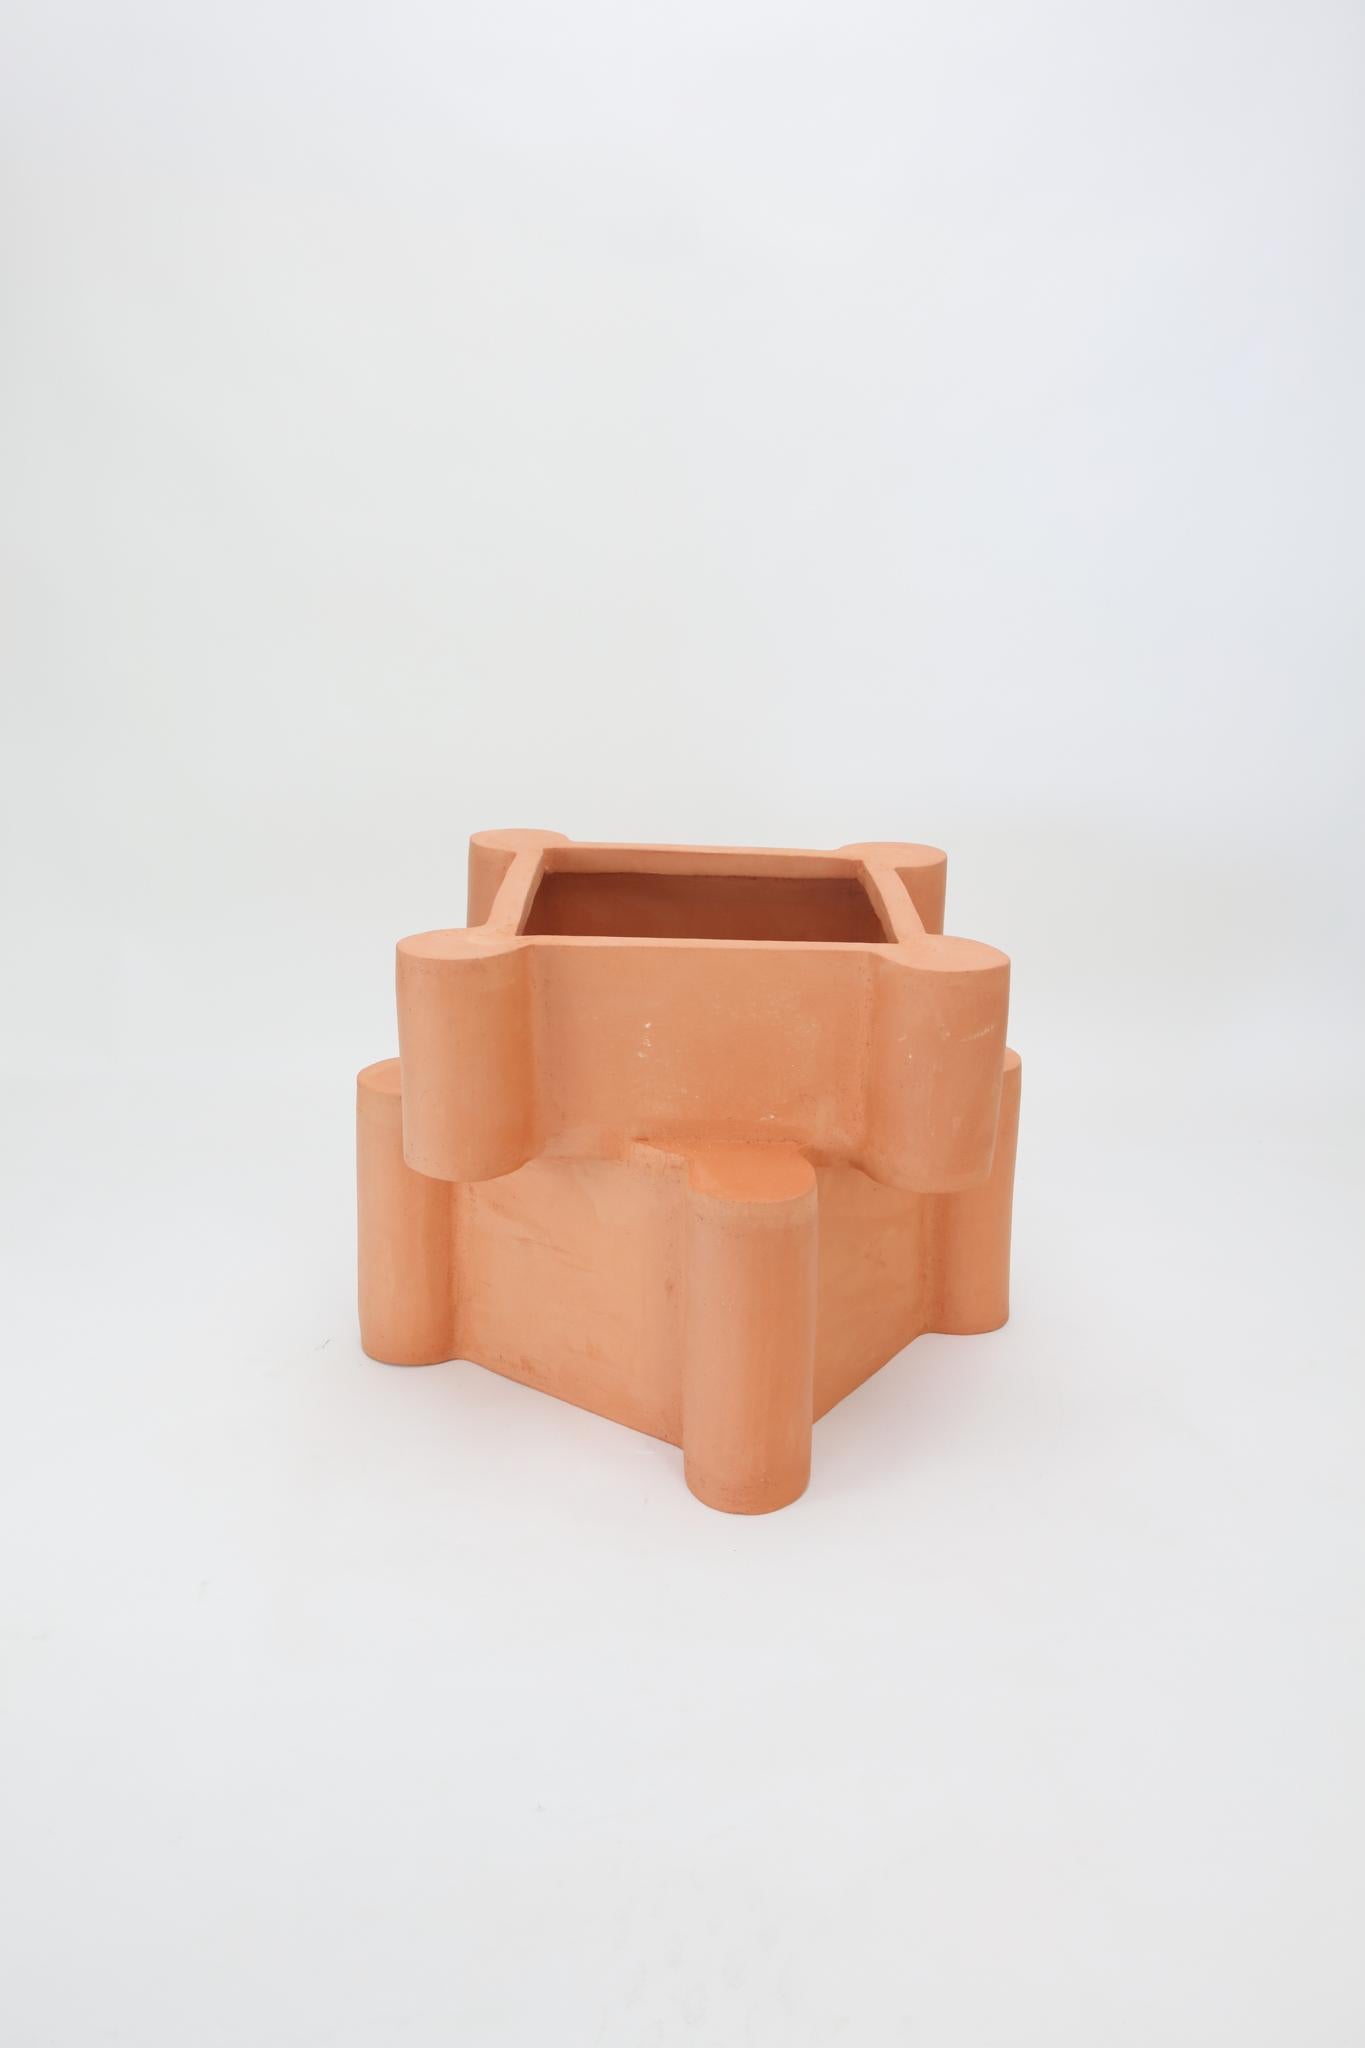 Twisted Castle Ceramic Planter in Raw Terracotta. Made to order.
 
BZIPPY ceramic goods are one-of-a-kind stoneware / earthenware editions including furniture, planters and home accessories. 
 
Each piece is designed, hand-built, glazed, and fired